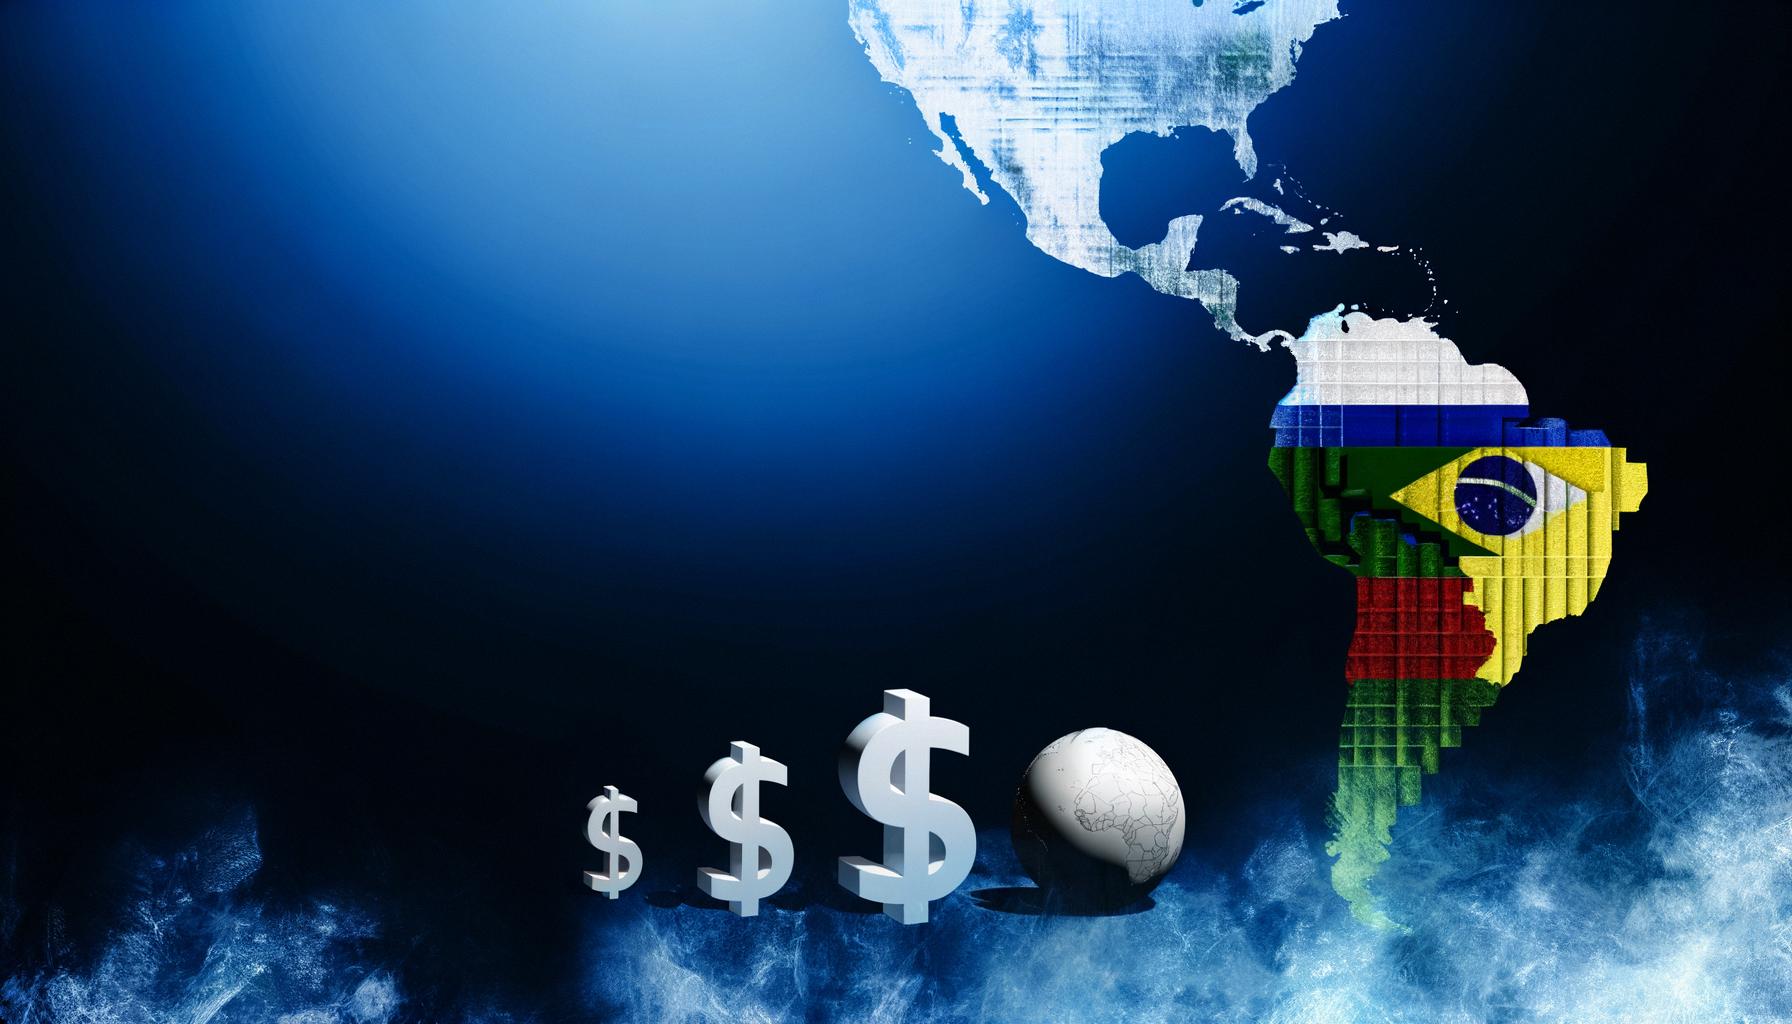 Latin America's resources and politics attract global interest and investment.